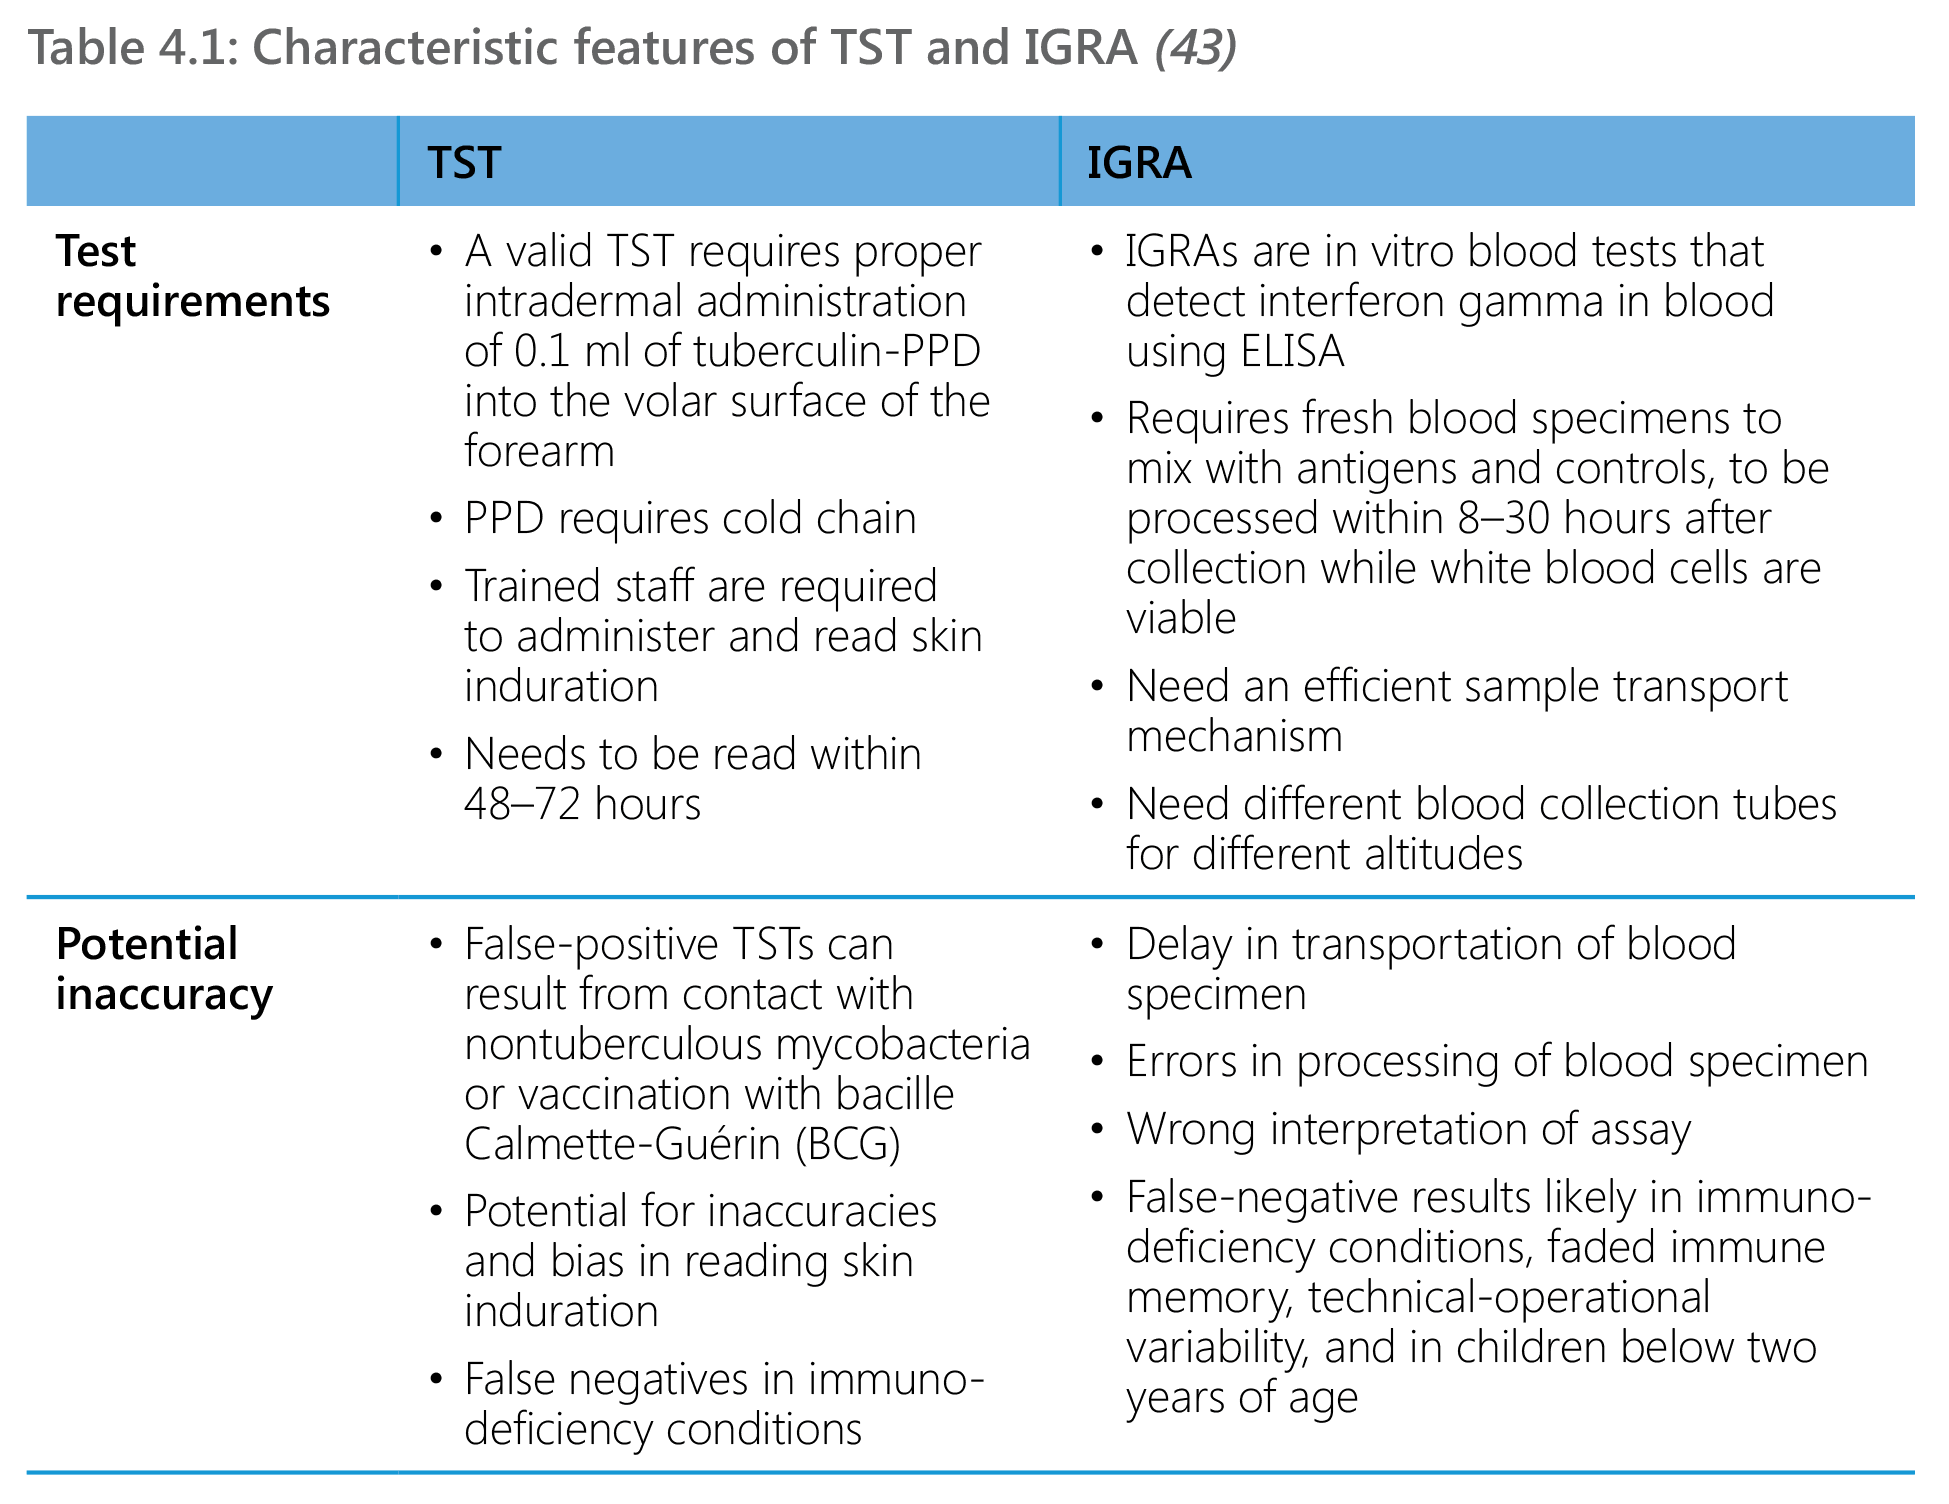 Characteristic features of TST and IGRA